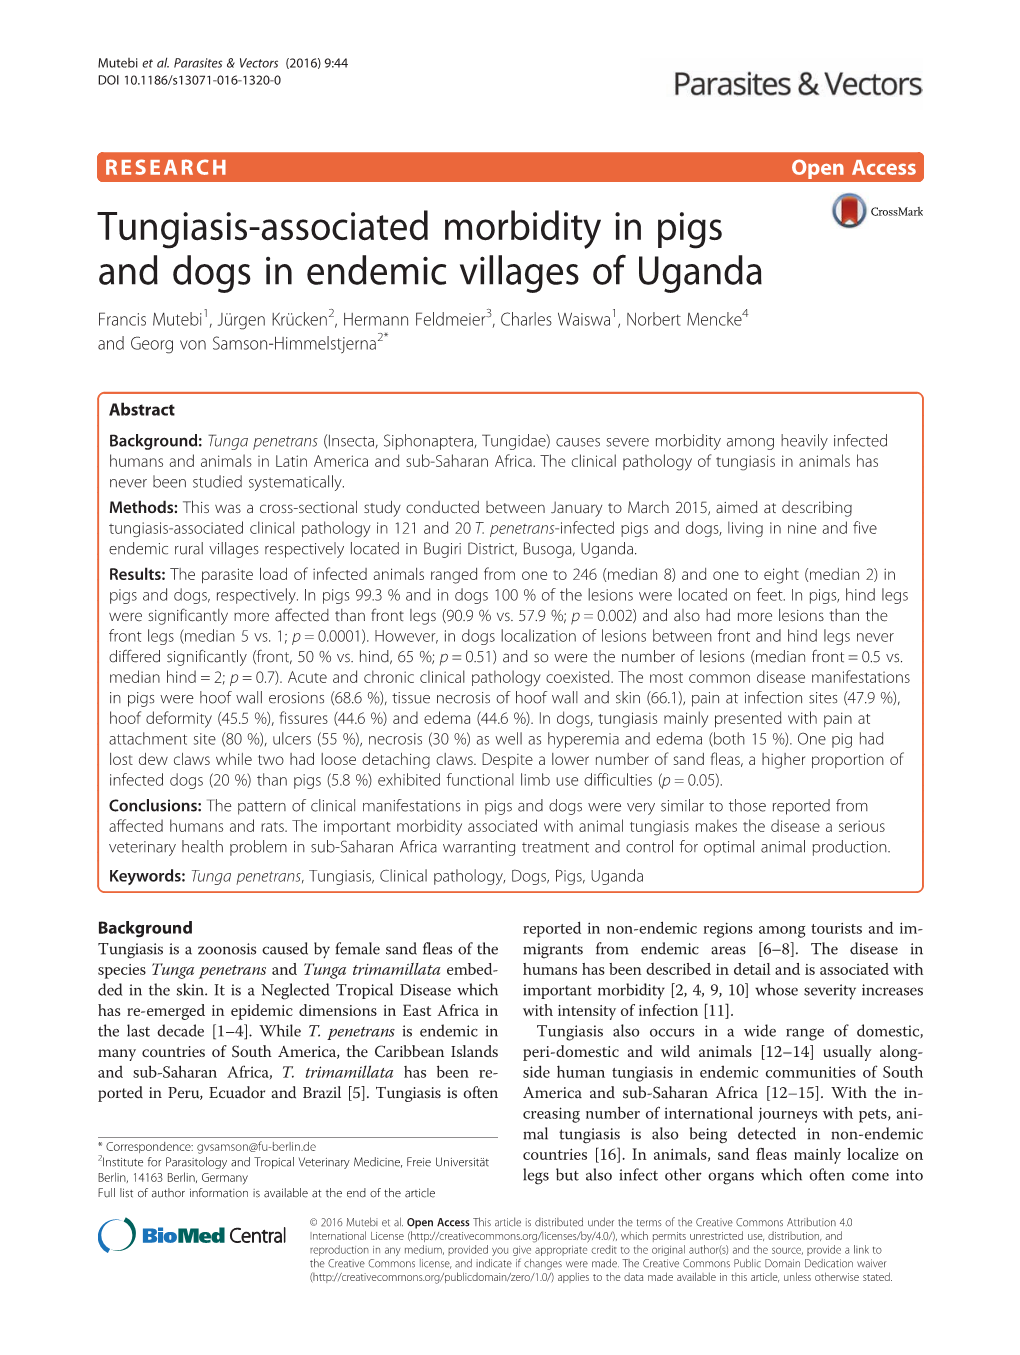 Tungiasis-Associated Morbidity in Pigs and Dogs in Endemic Villages Of